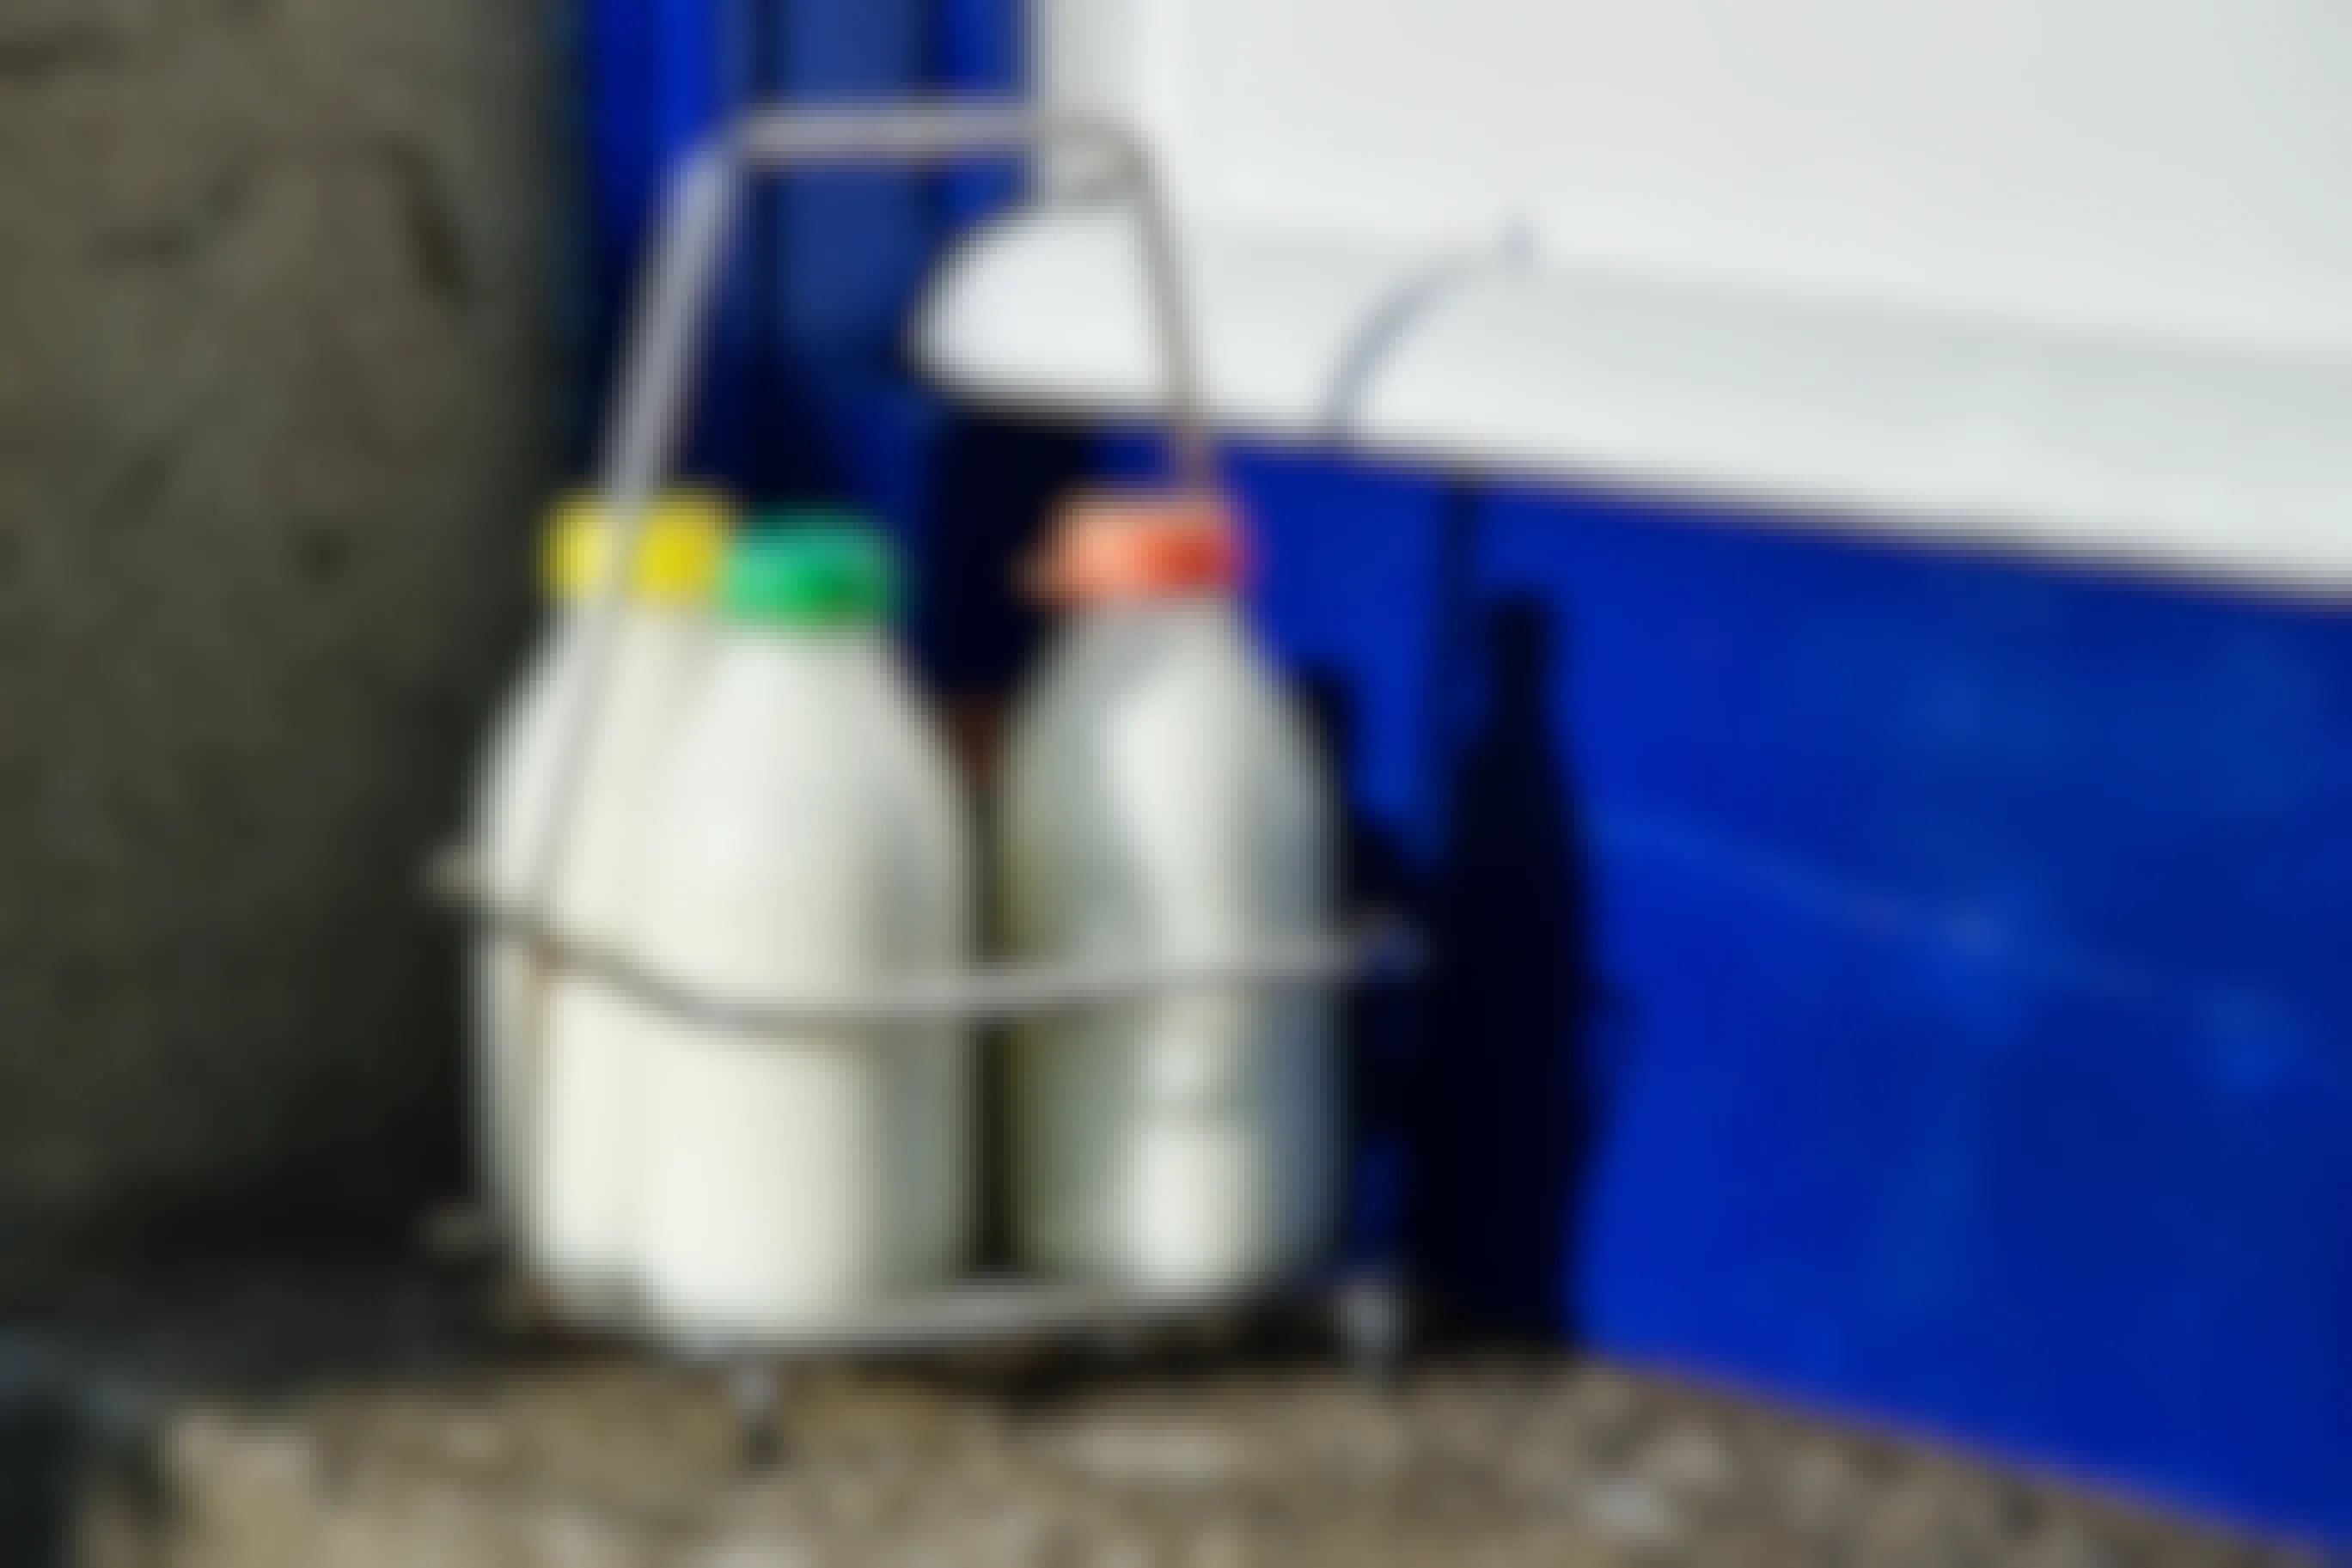 Bottles of milk in a container set on the doorstep of a home